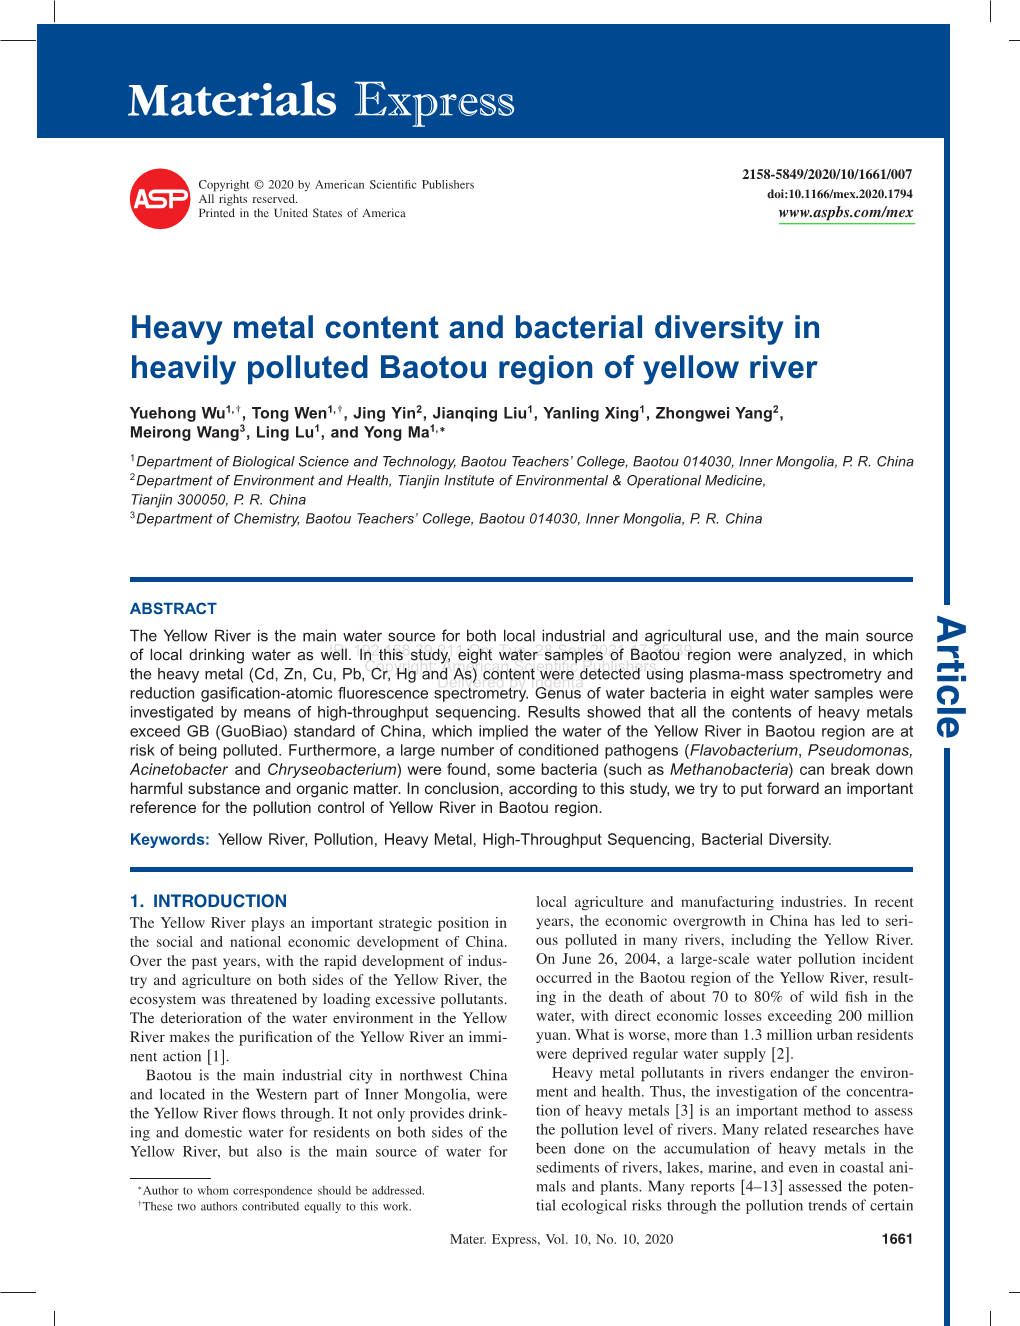 Heavy Metal Content and Bacterial Diversity in Heavily Polluted Baotou Region of Yellow River